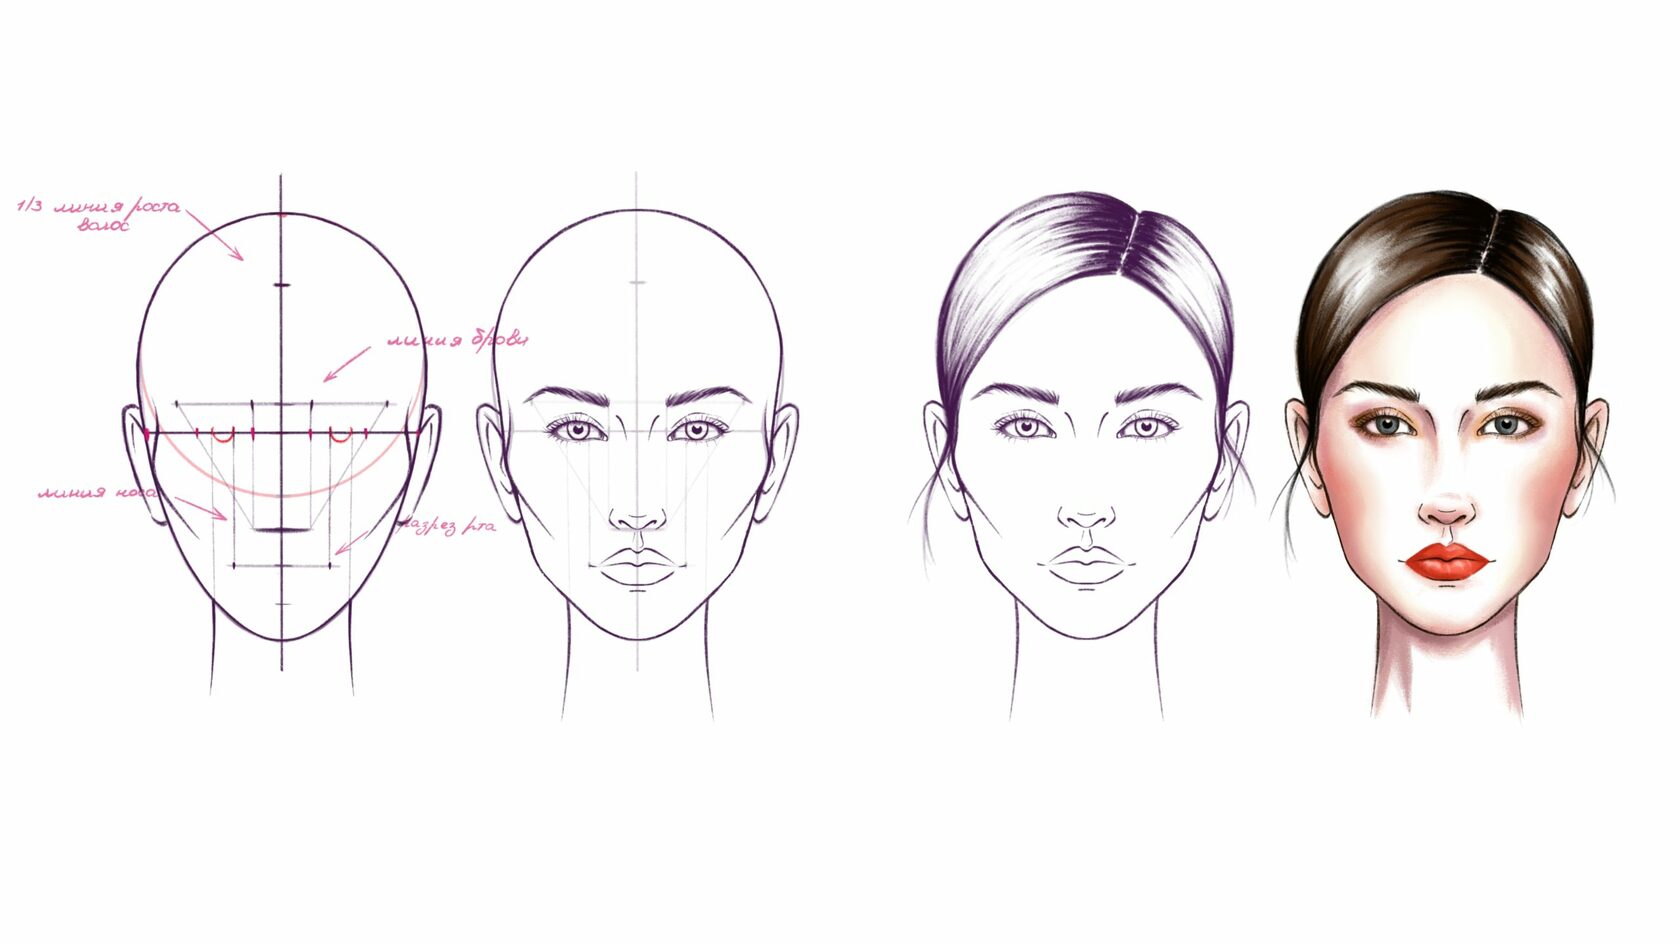 How to draw a female face in 8 steps | RapidFireArt